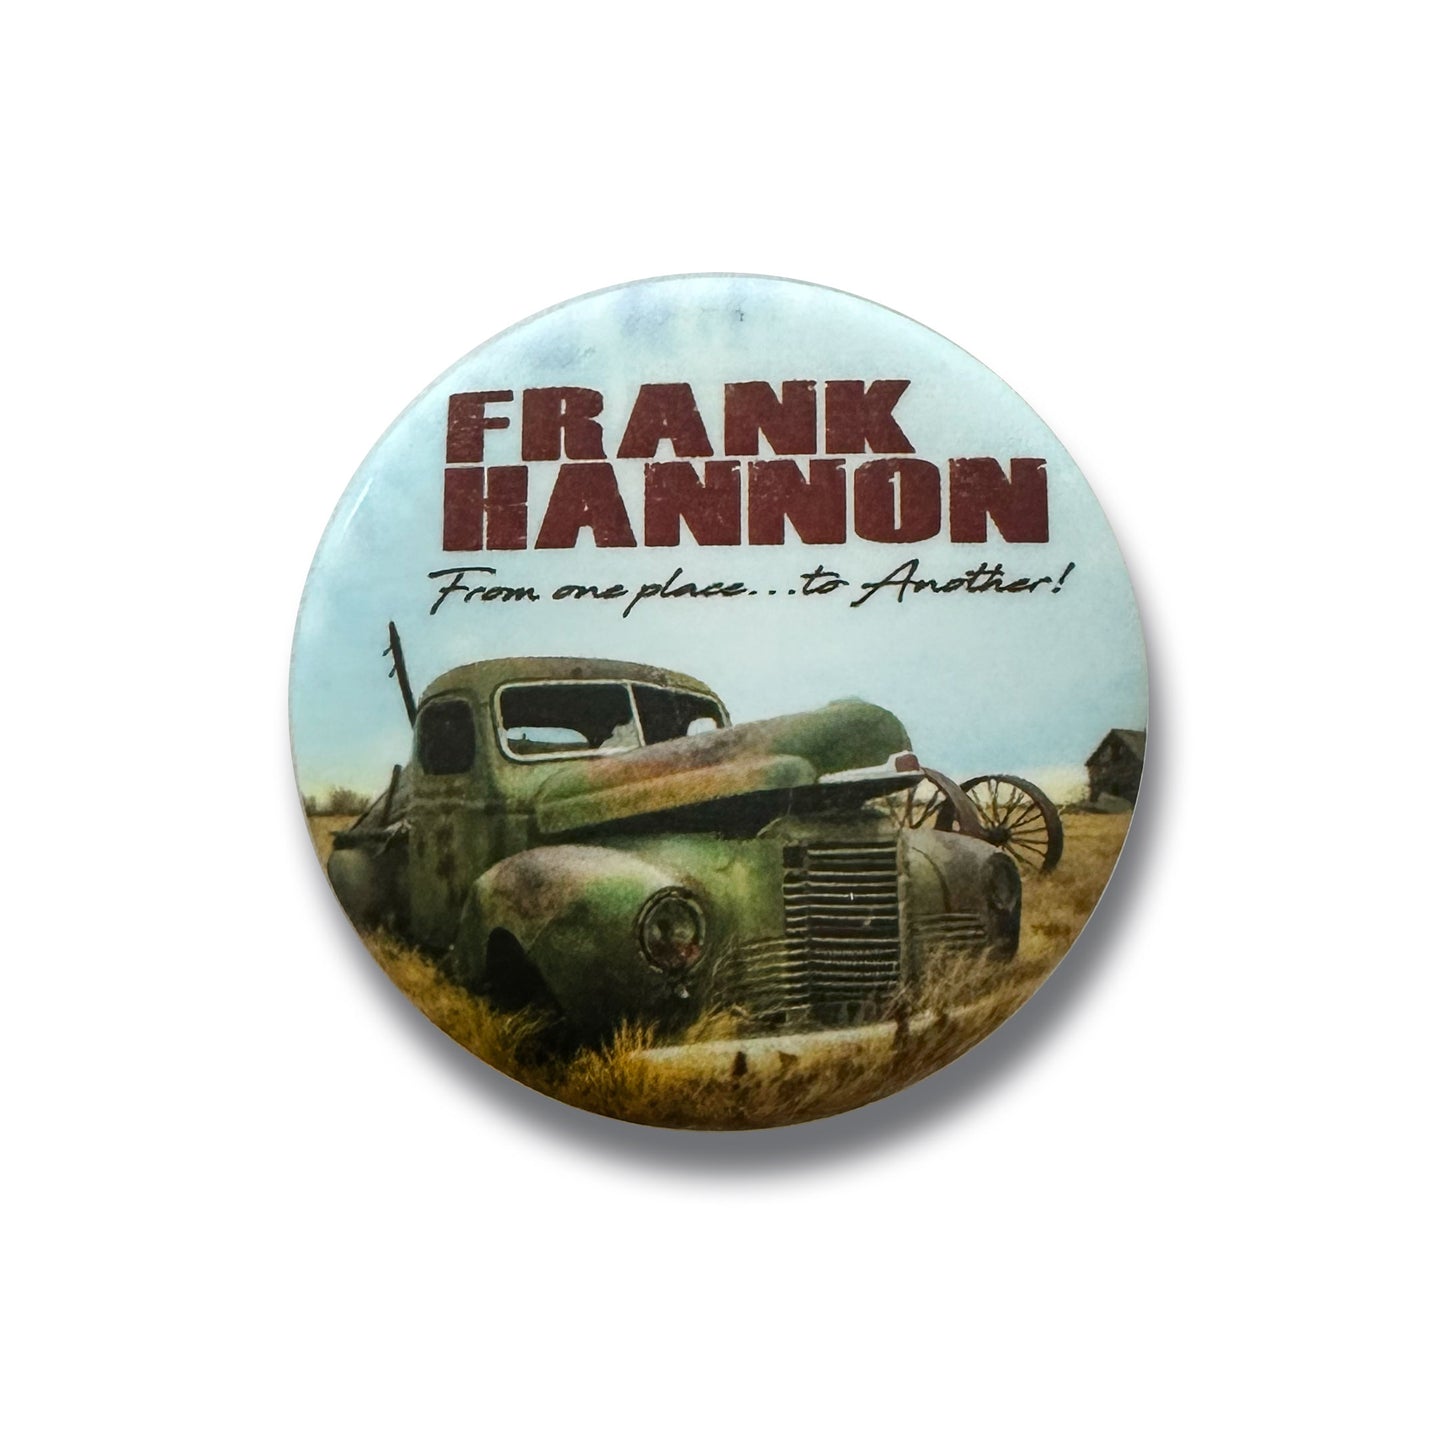 "From one place...to another!, Vol. I" 1.5" Pinback Button